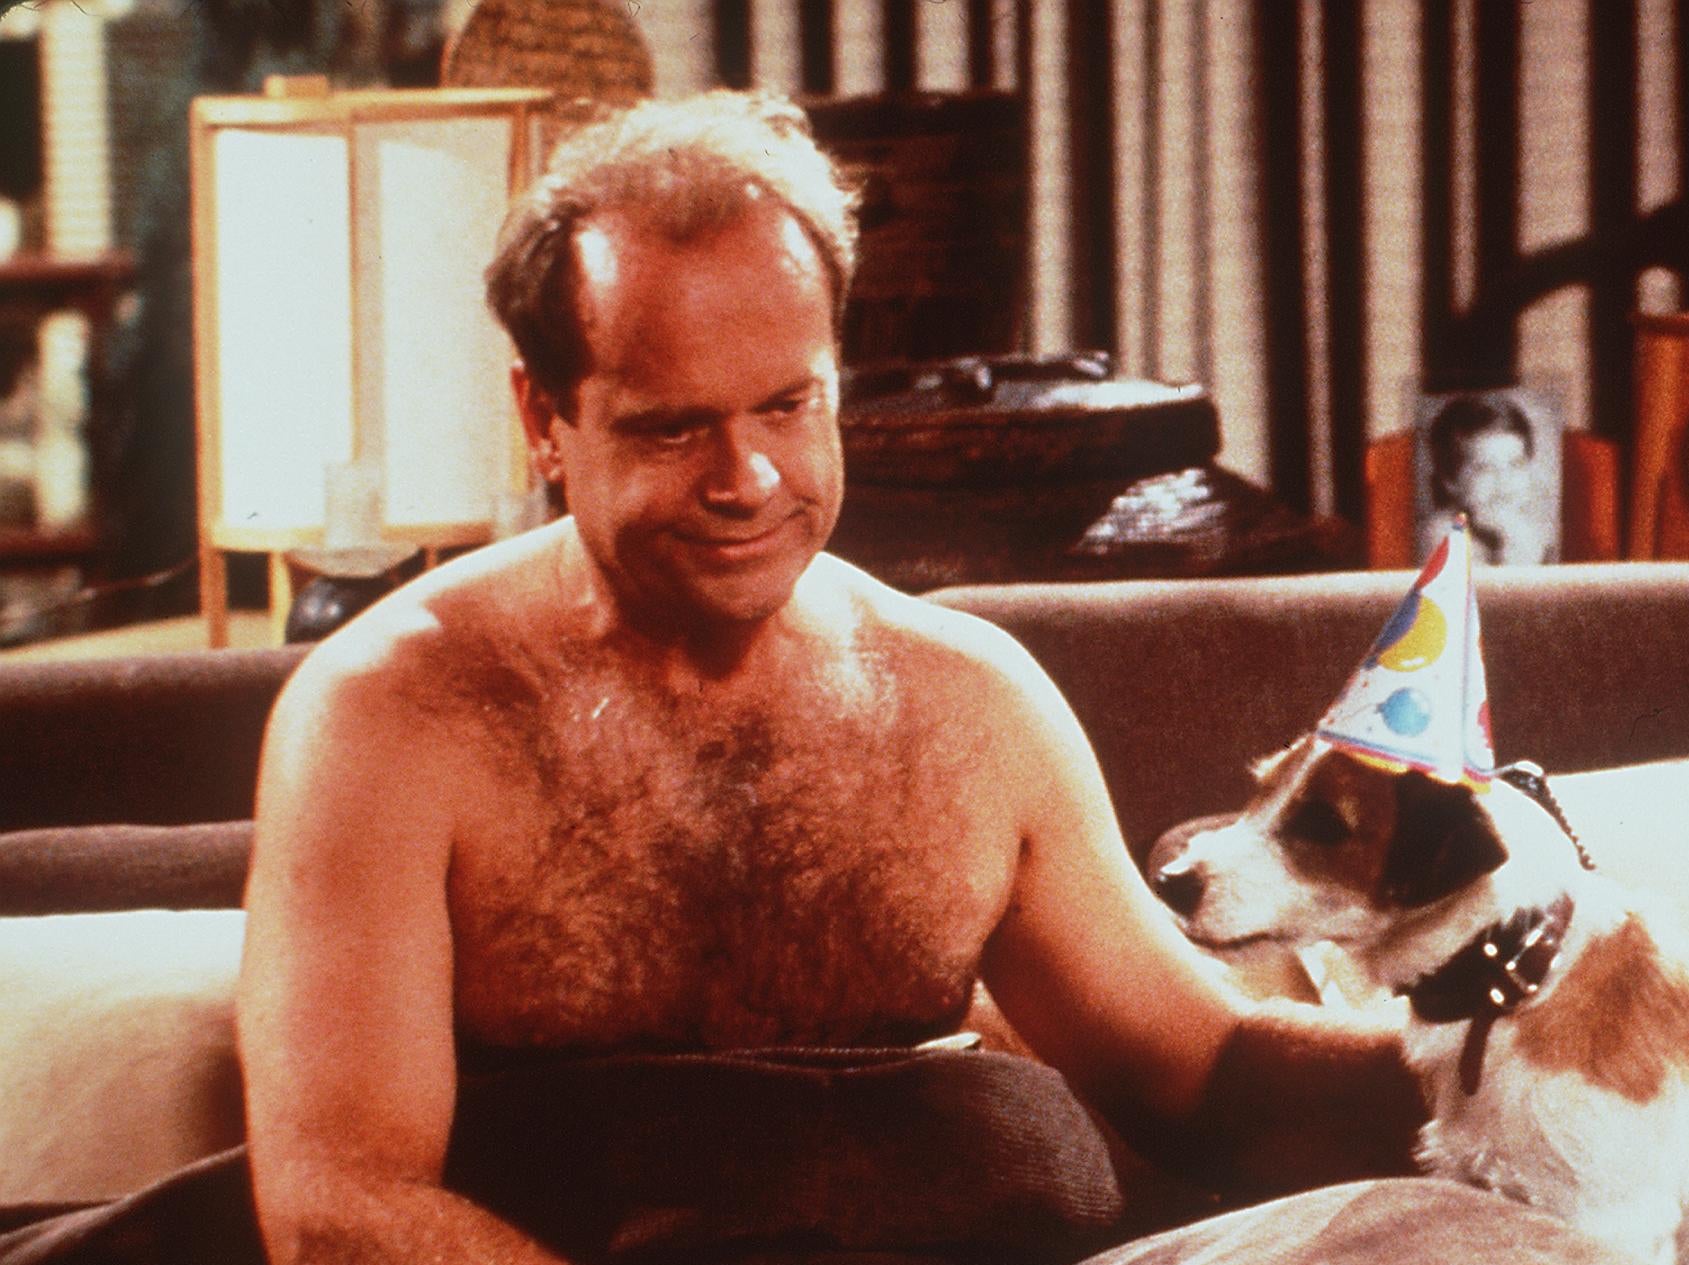 Ruff night: Kelsey Grammer as Frasier Crane and Moose the dog as Eddie in an episode of the classic sitcom ‘Frasier’